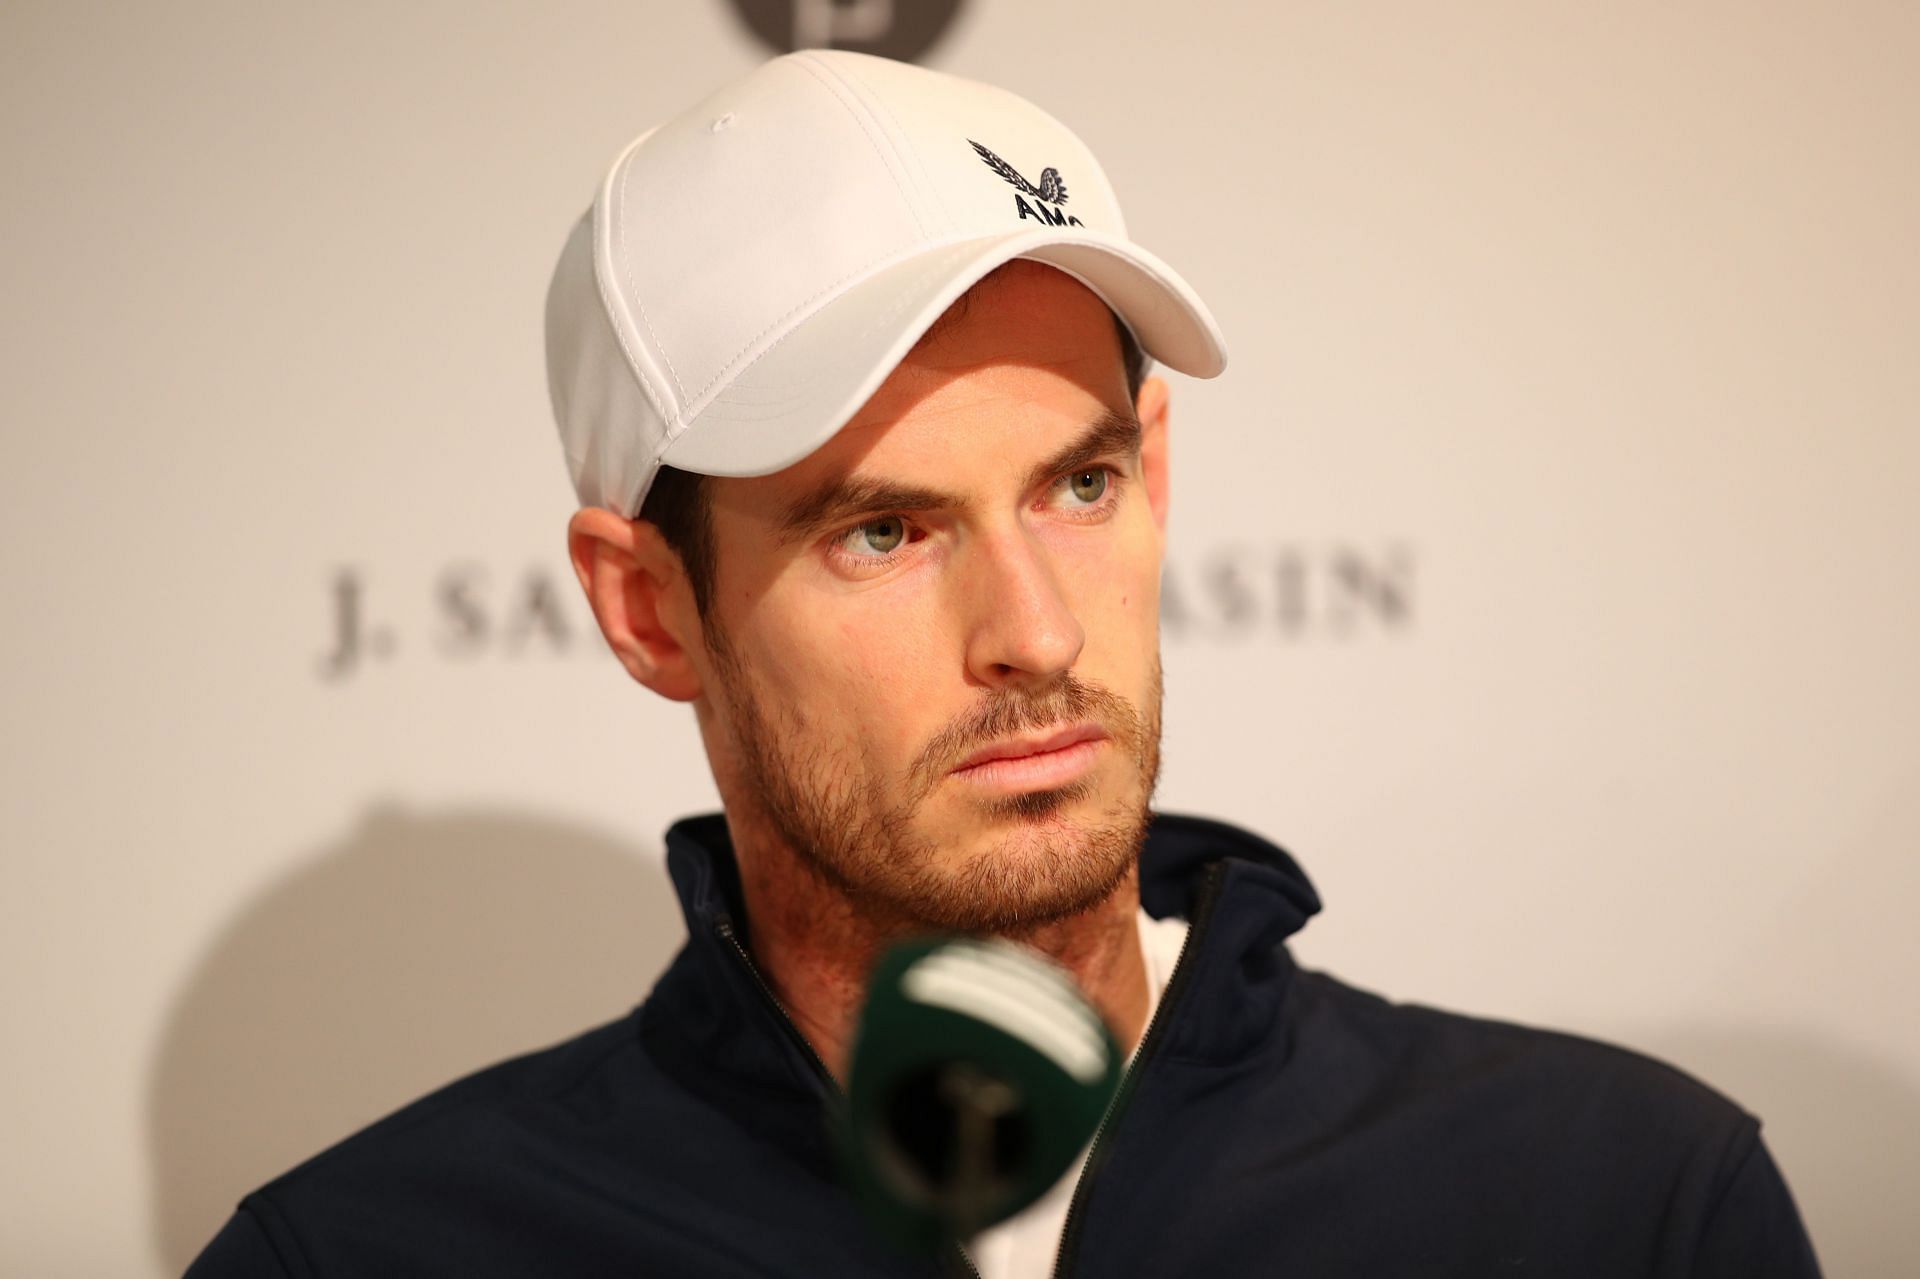 Andy Murray speaking to members of the media ahead of the 2019 Davis Cup